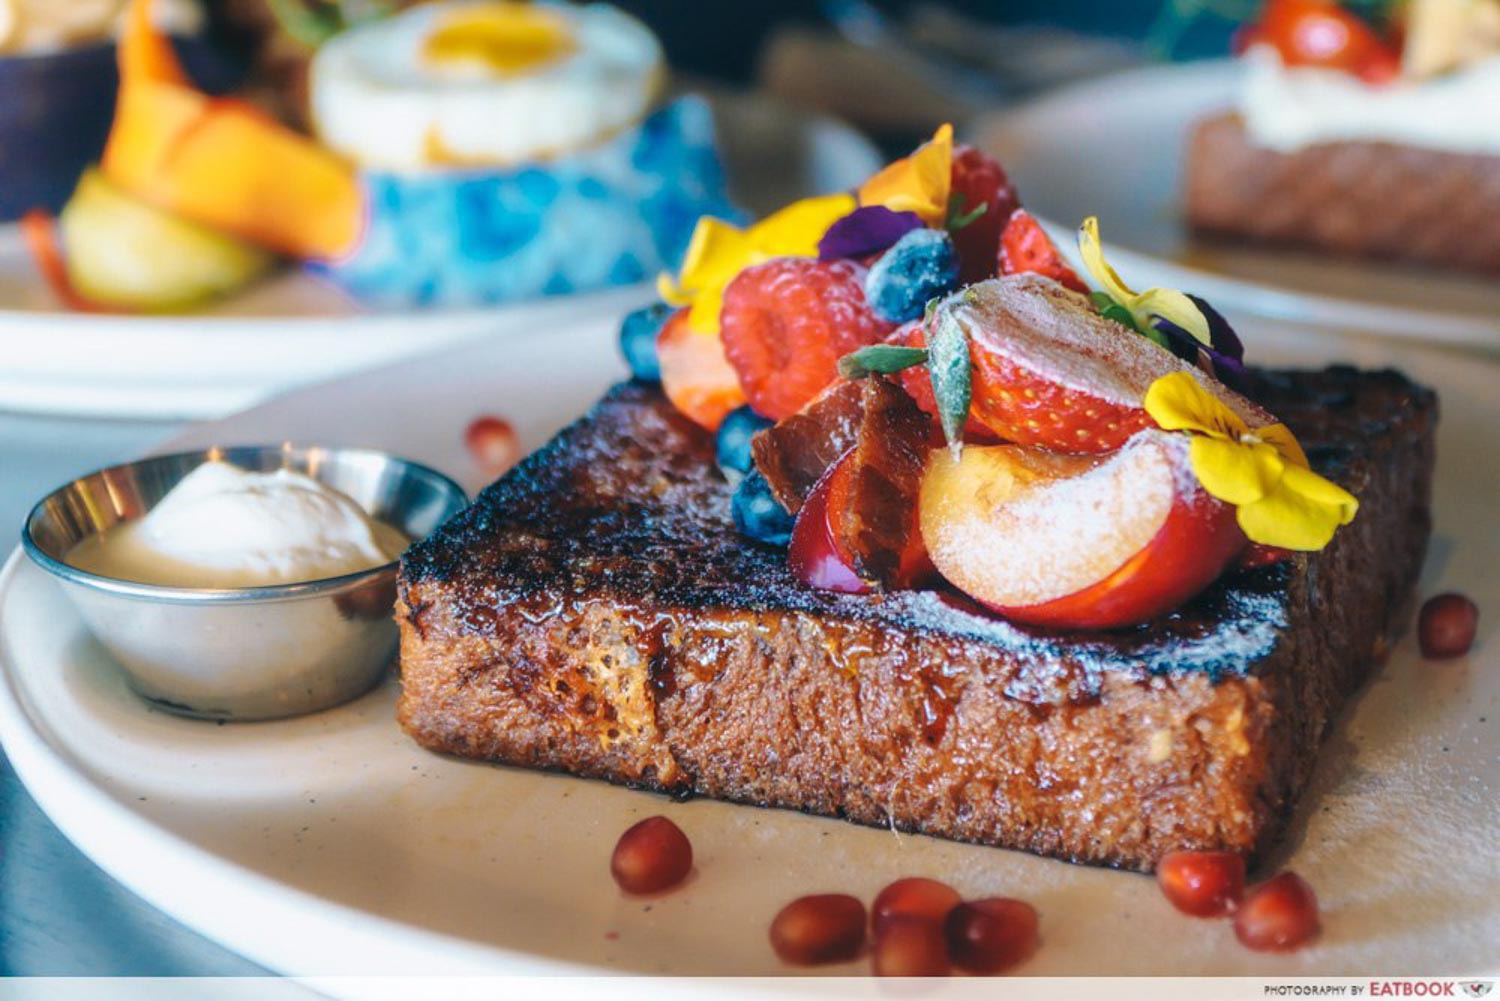 Bukit Timah Cafes - Brulee French Toast